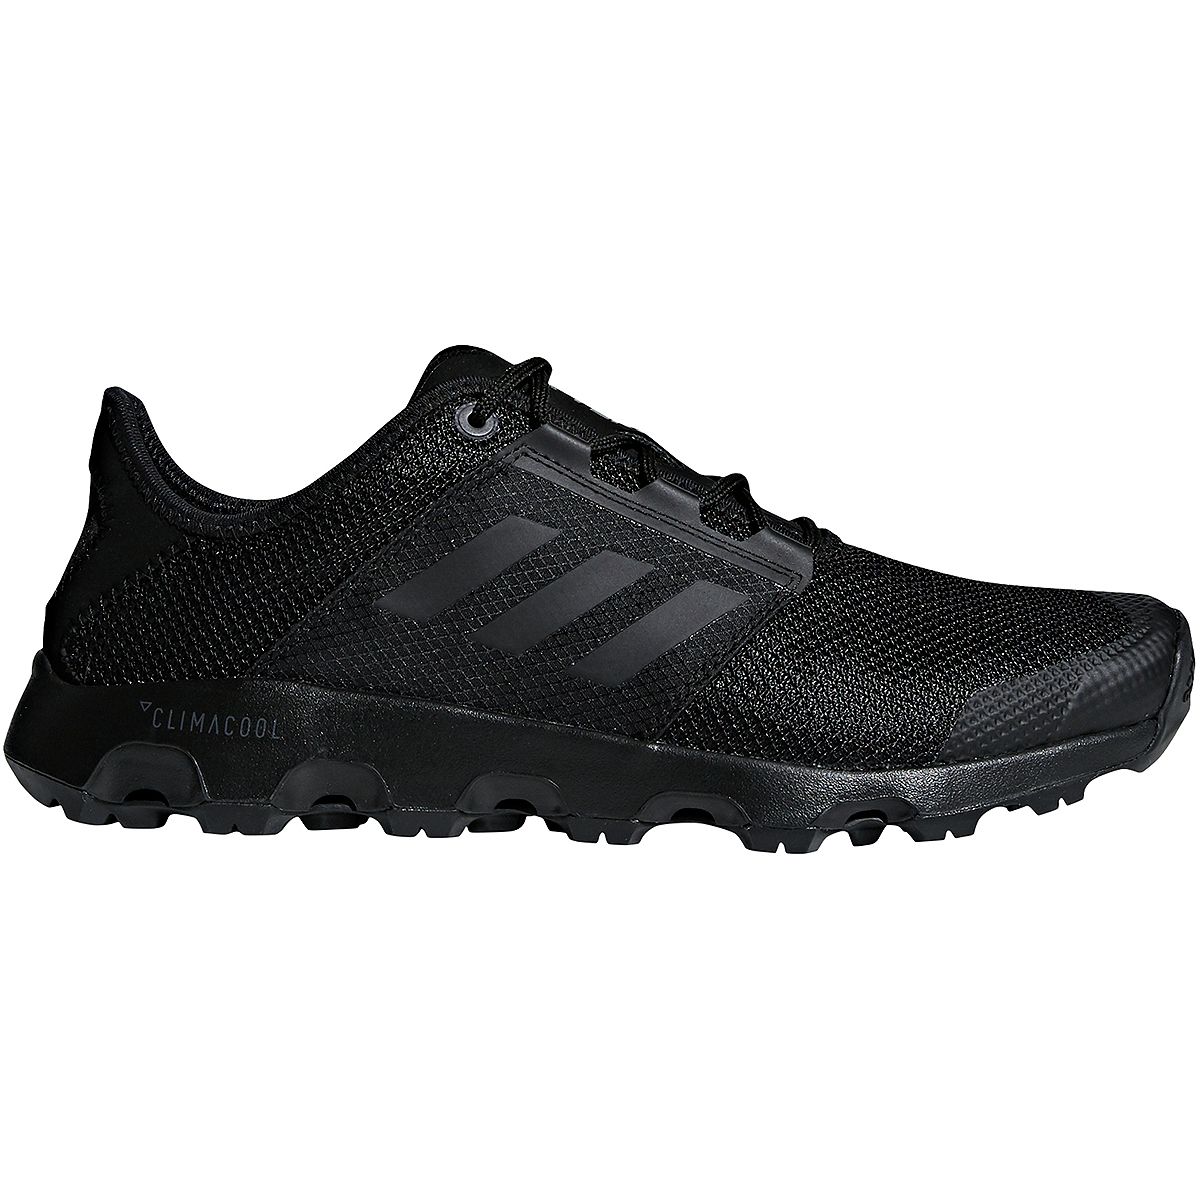 adidas outdoor climacool voyager boat shoe